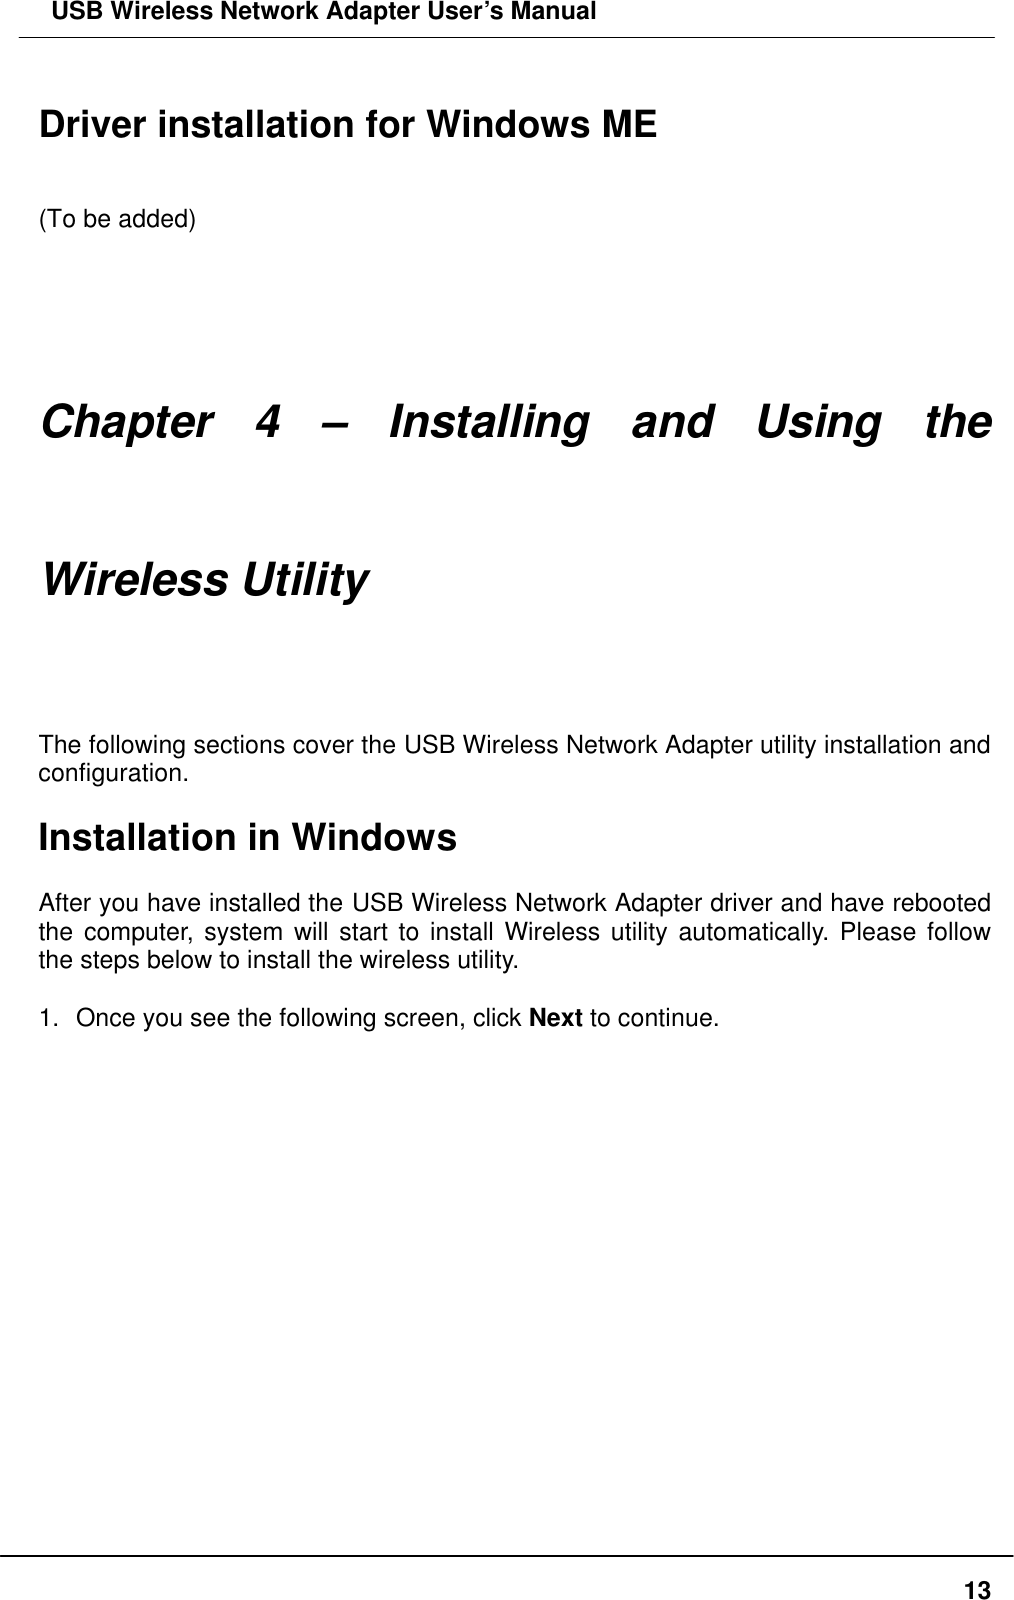  USB Wireless Network Adapter User’s Manual  13 Driver installation for Windows ME   (To be added)      Chapter 4 – Installing and Using the Wireless Utility The following sections cover the USB Wireless Network Adapter utility installation and configuration.  Installation in Windows  After you have installed the USB Wireless Network Adapter driver and have rebooted the computer, system will start to install Wireless utility automatically. Please follow the steps below to install the wireless utility.  1. Once you see the following screen, click Next to continue.  